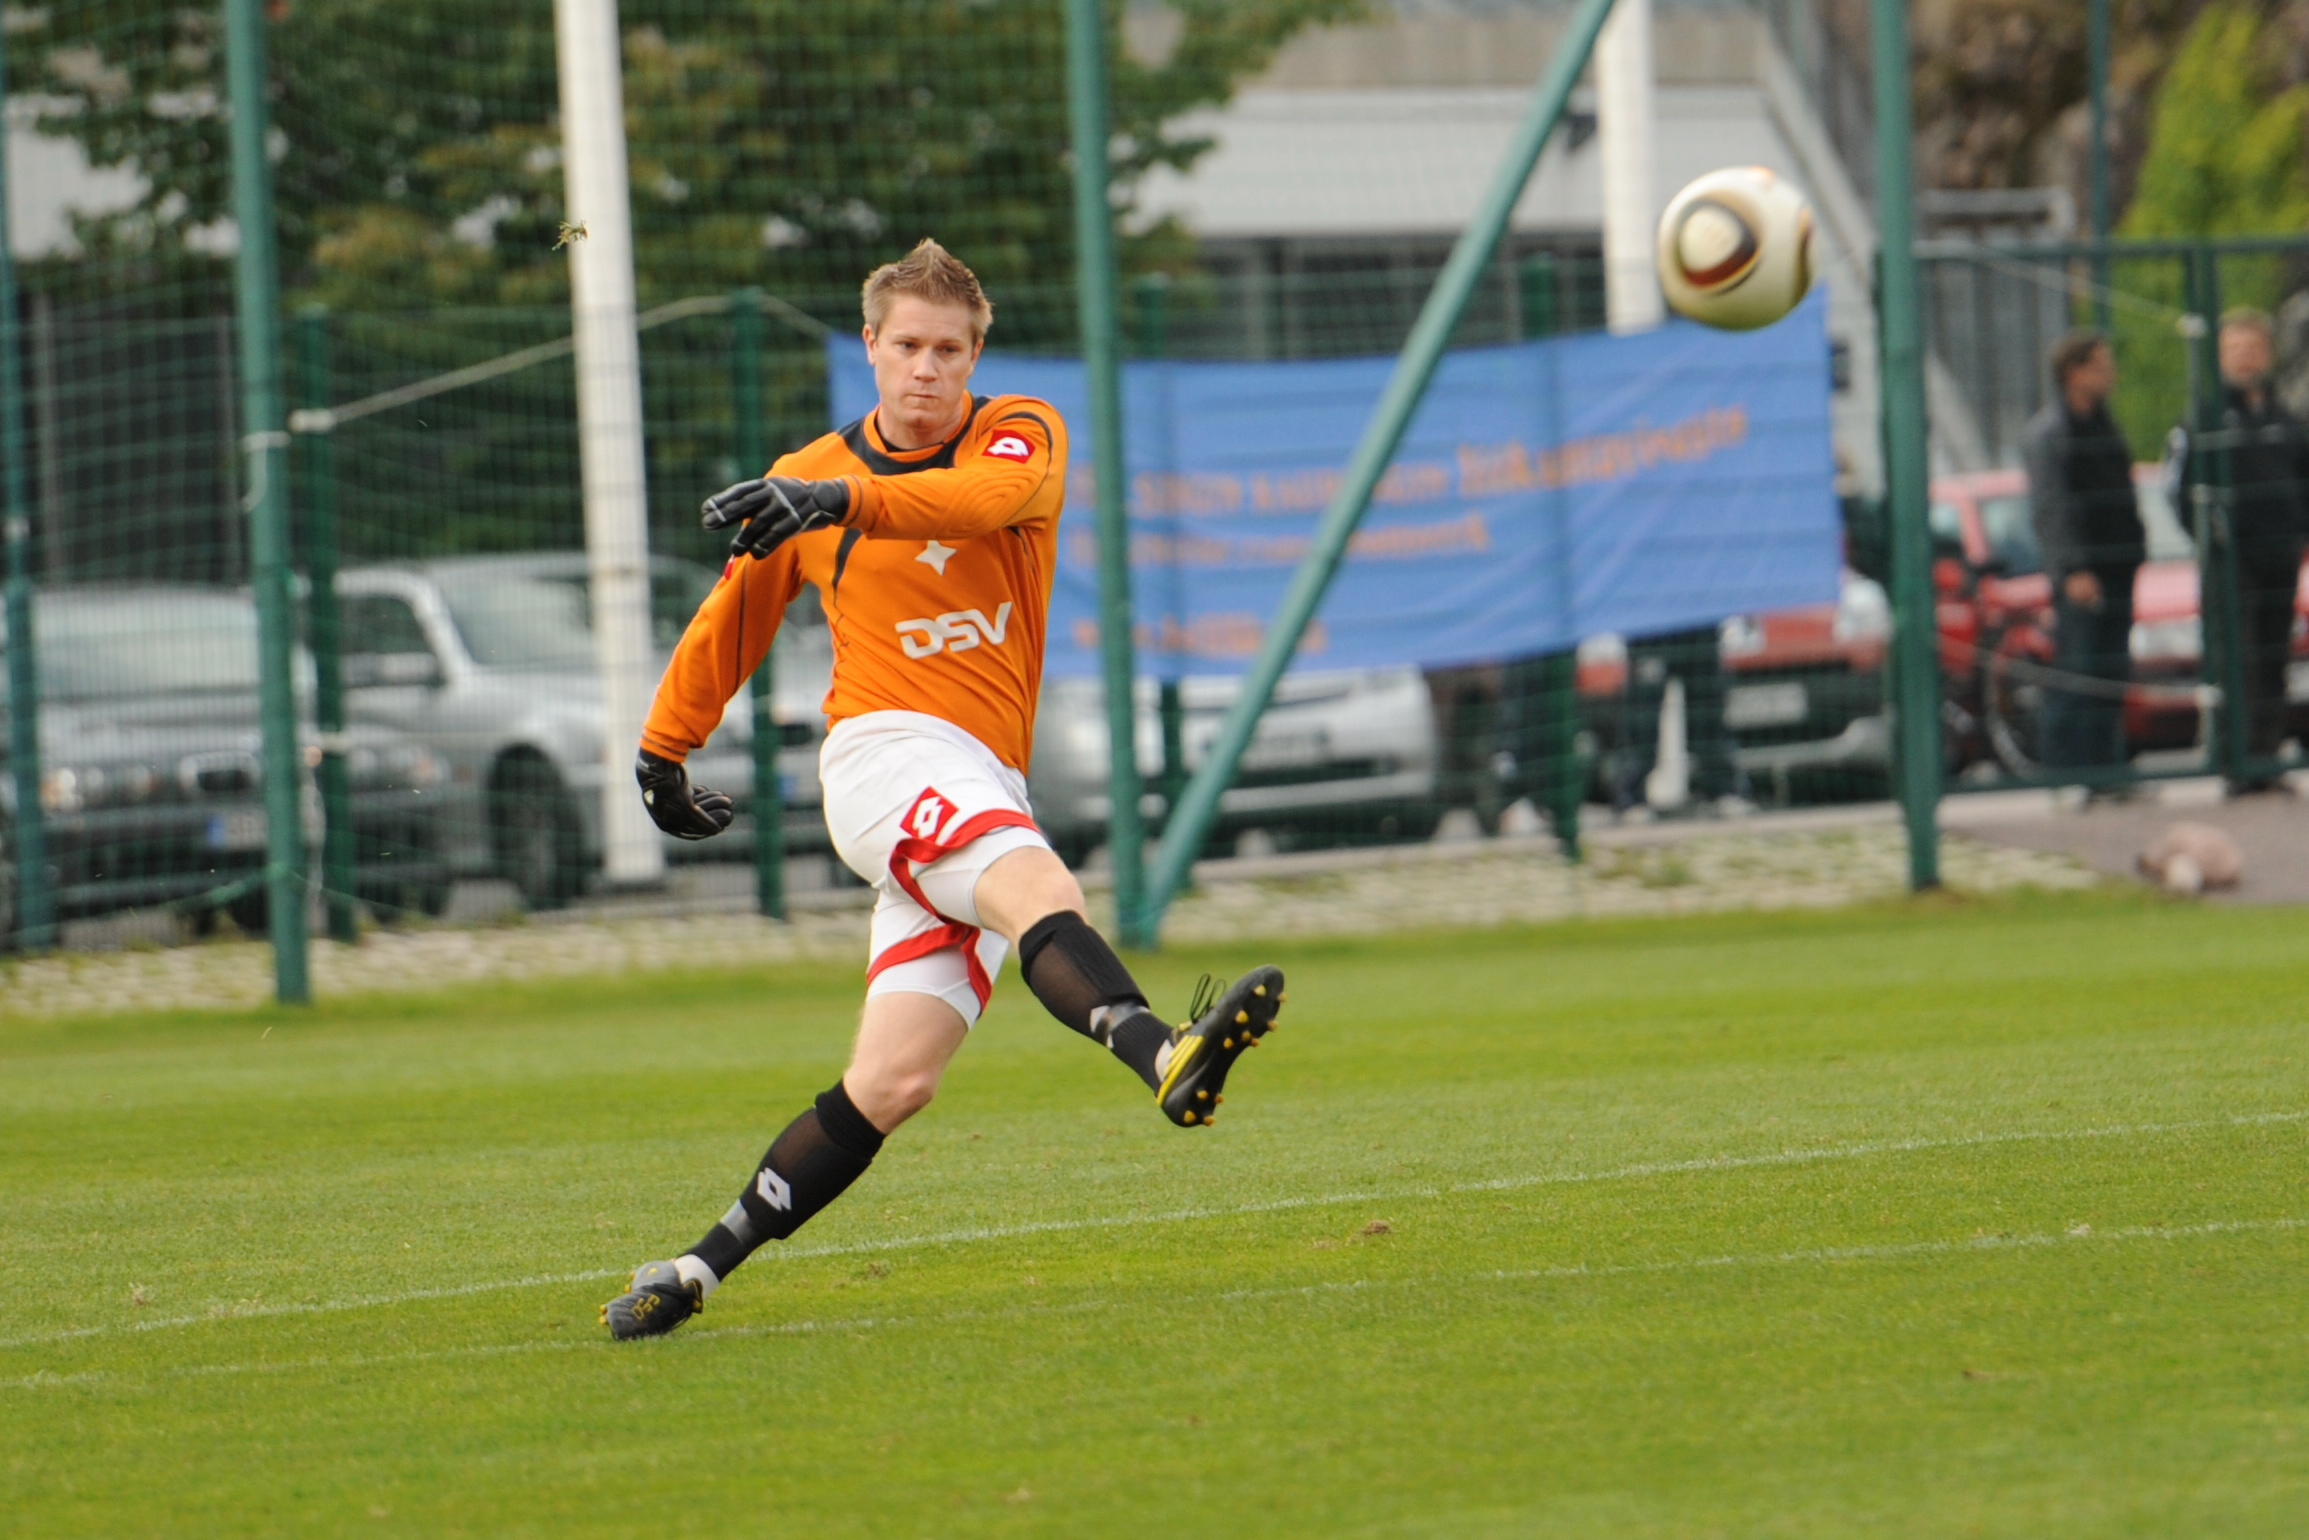 Ten years since that day in Tammela – Kellan Wilson recalls the match and qualification